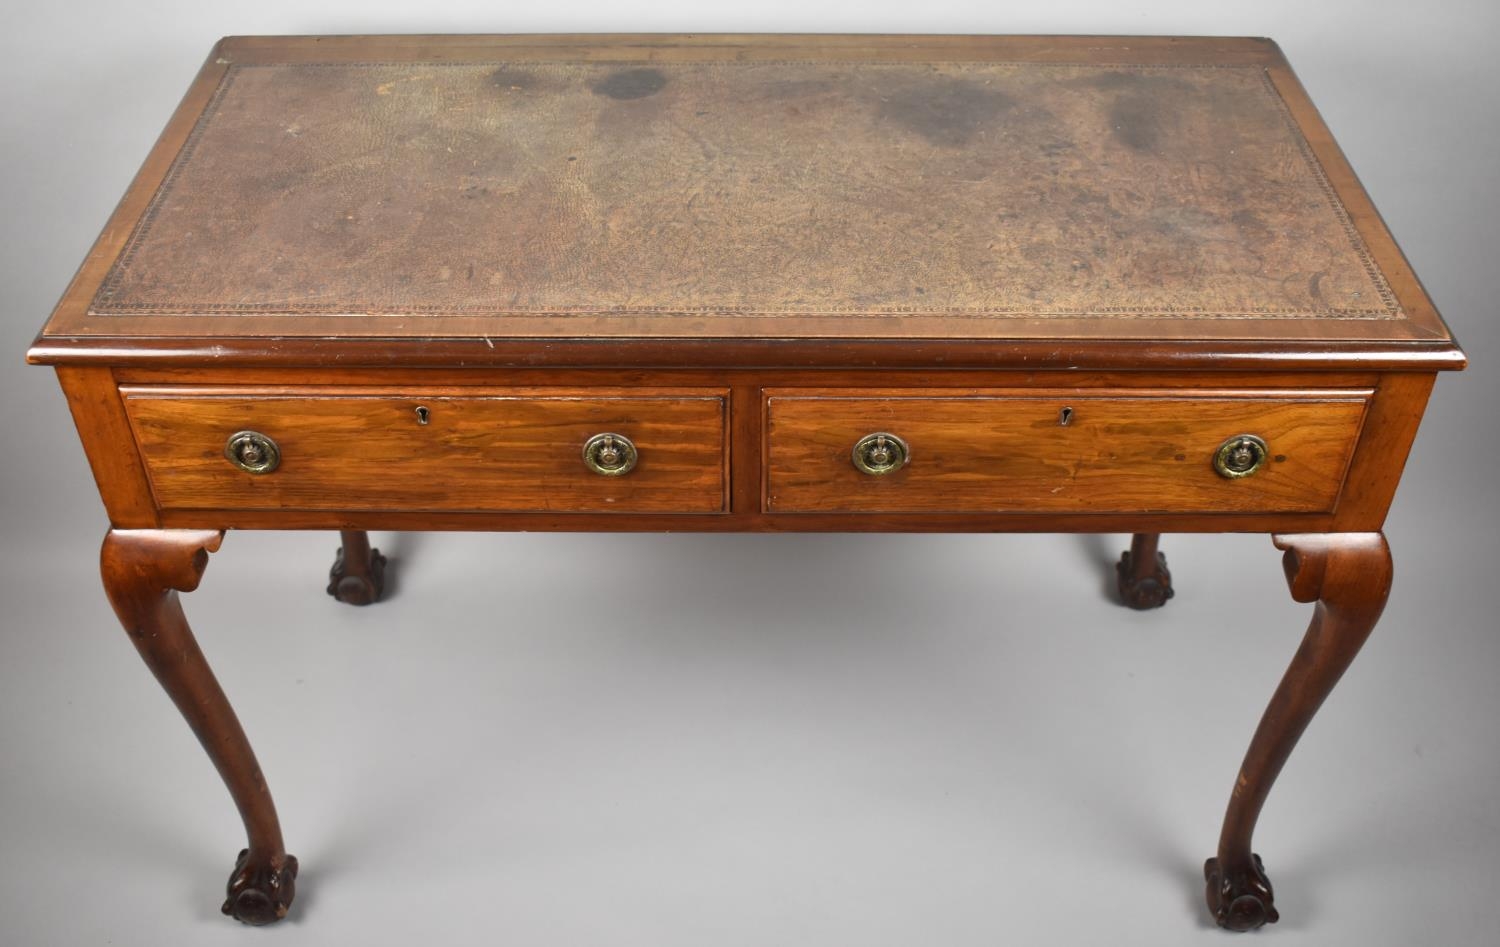 A Mid 20th Century Writing Desk with Tooled Leather Top, Two Drawers and Cabriole Support - Image 2 of 2